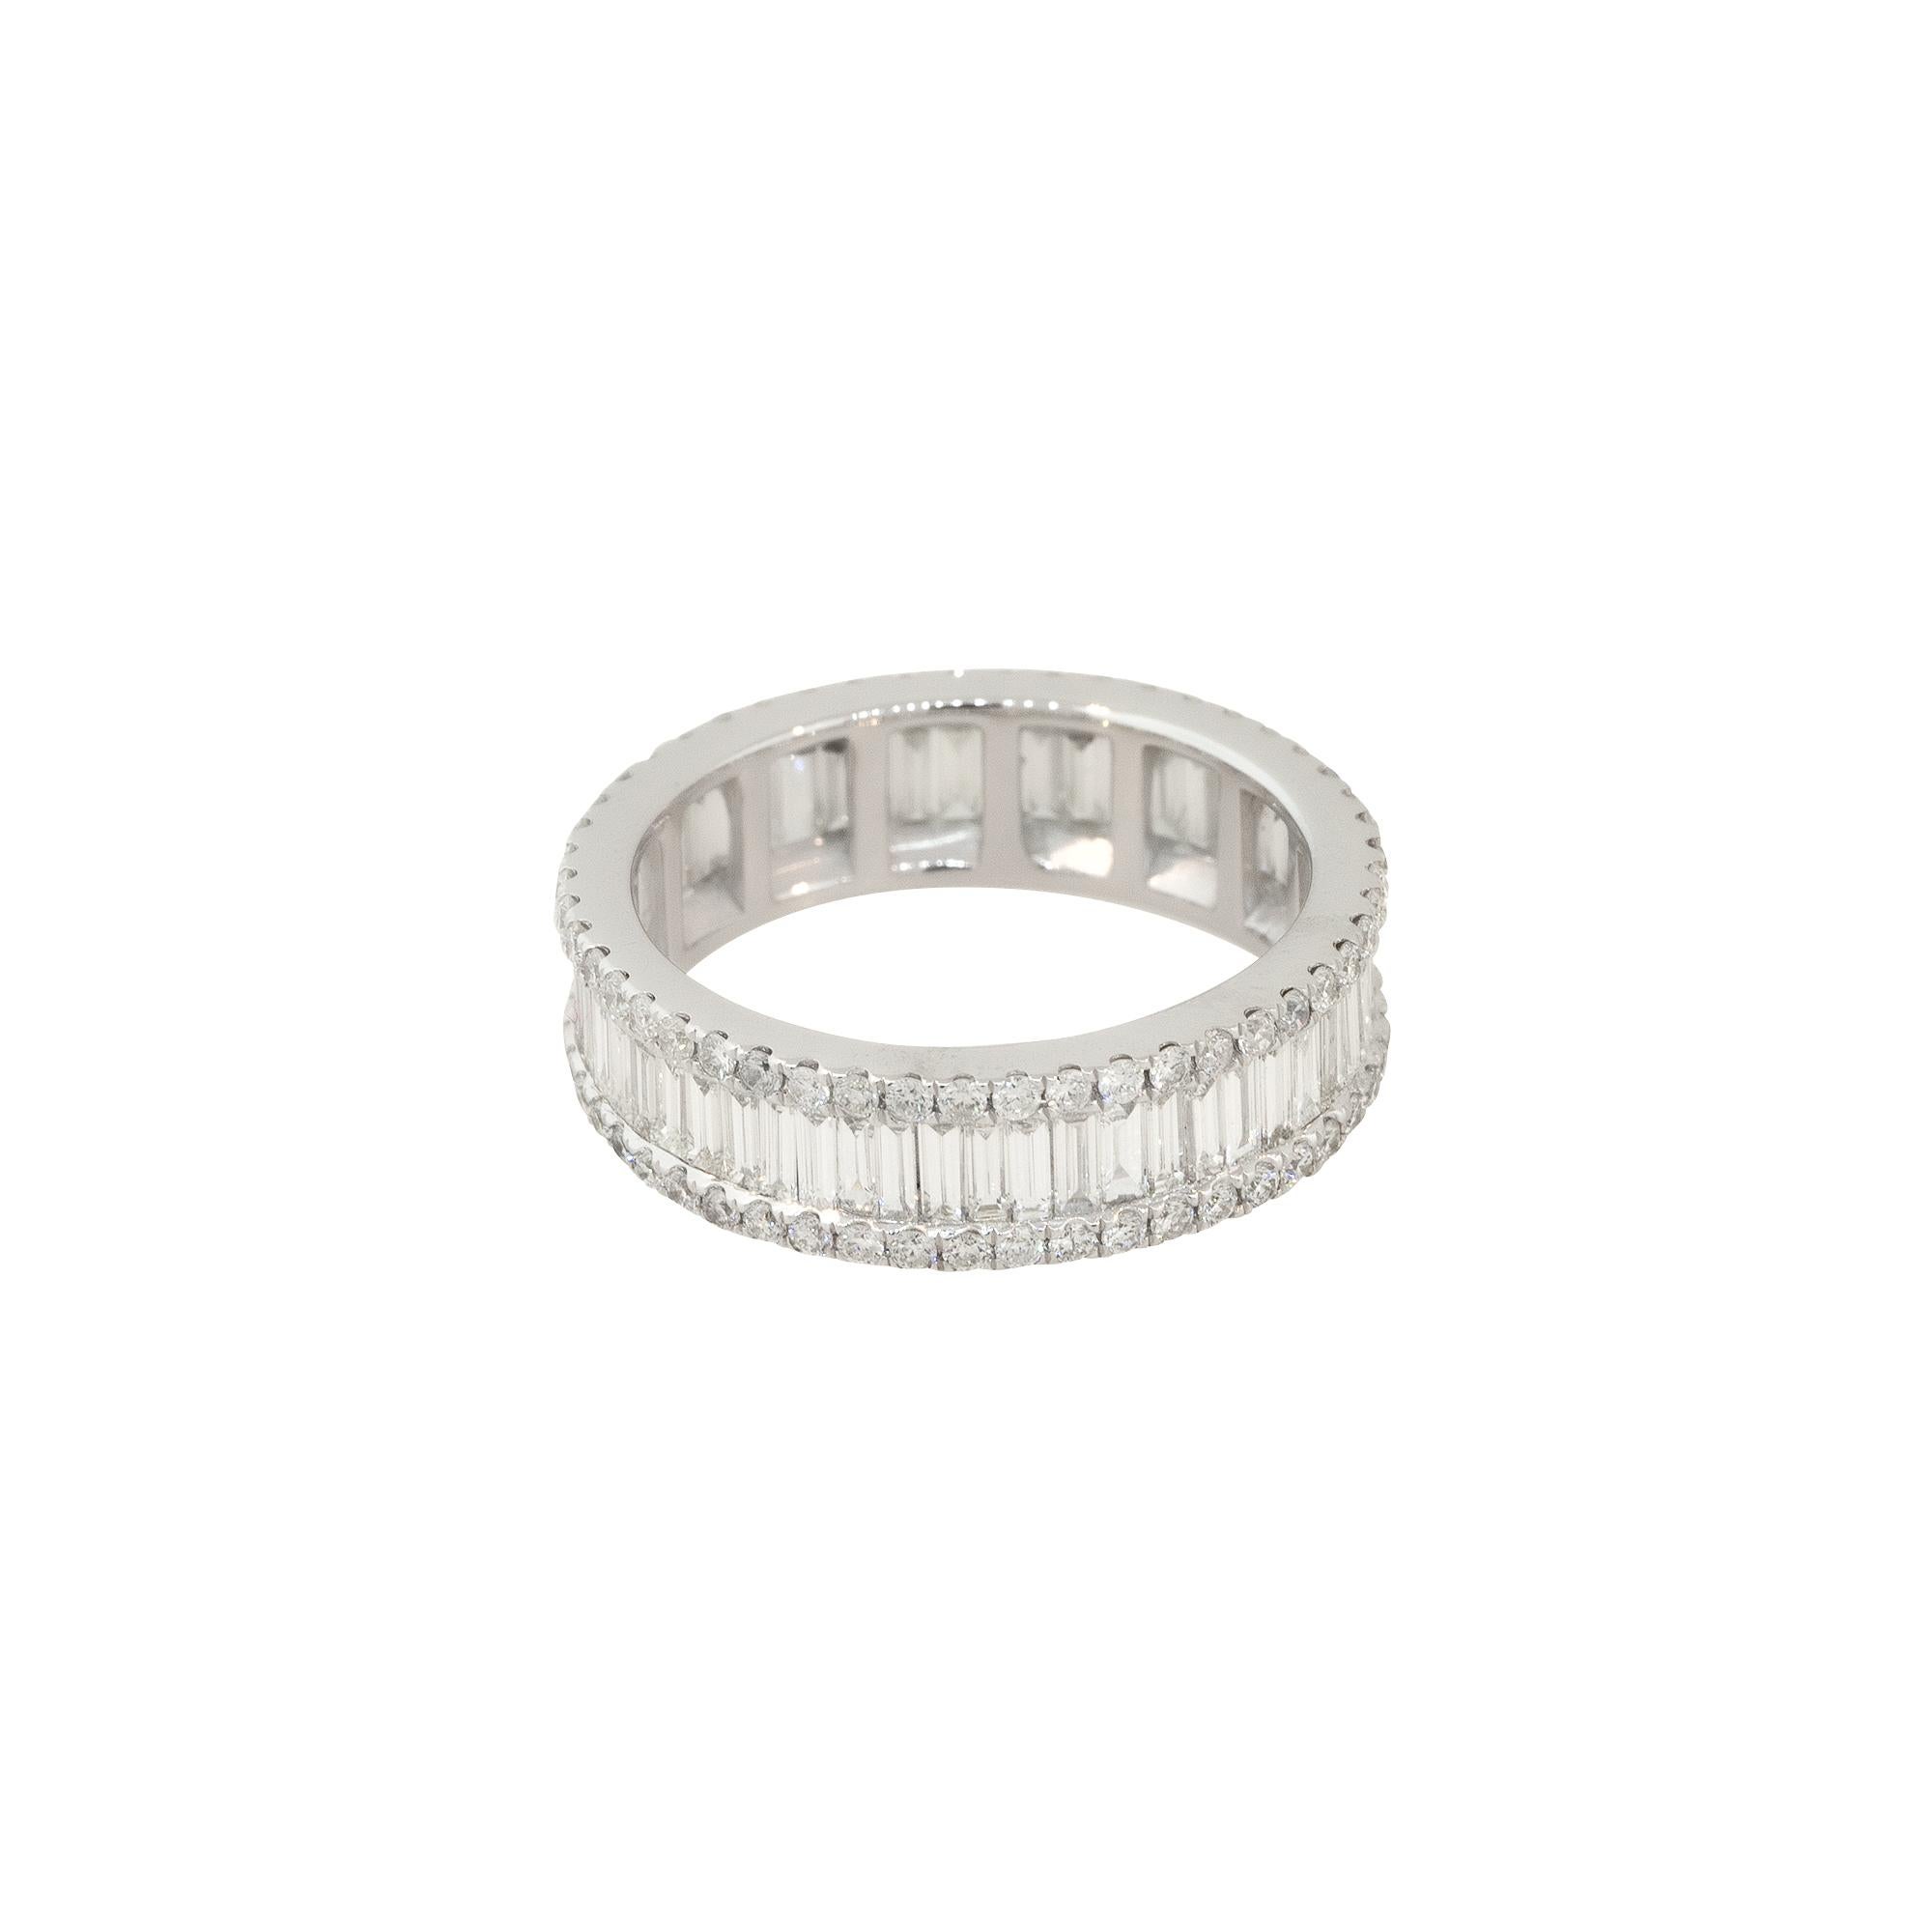 3.40 Carat Baguette and Round Brilliant Cut Diamond Eternity Band 14 Karat In Excellent Condition For Sale In Boca Raton, FL